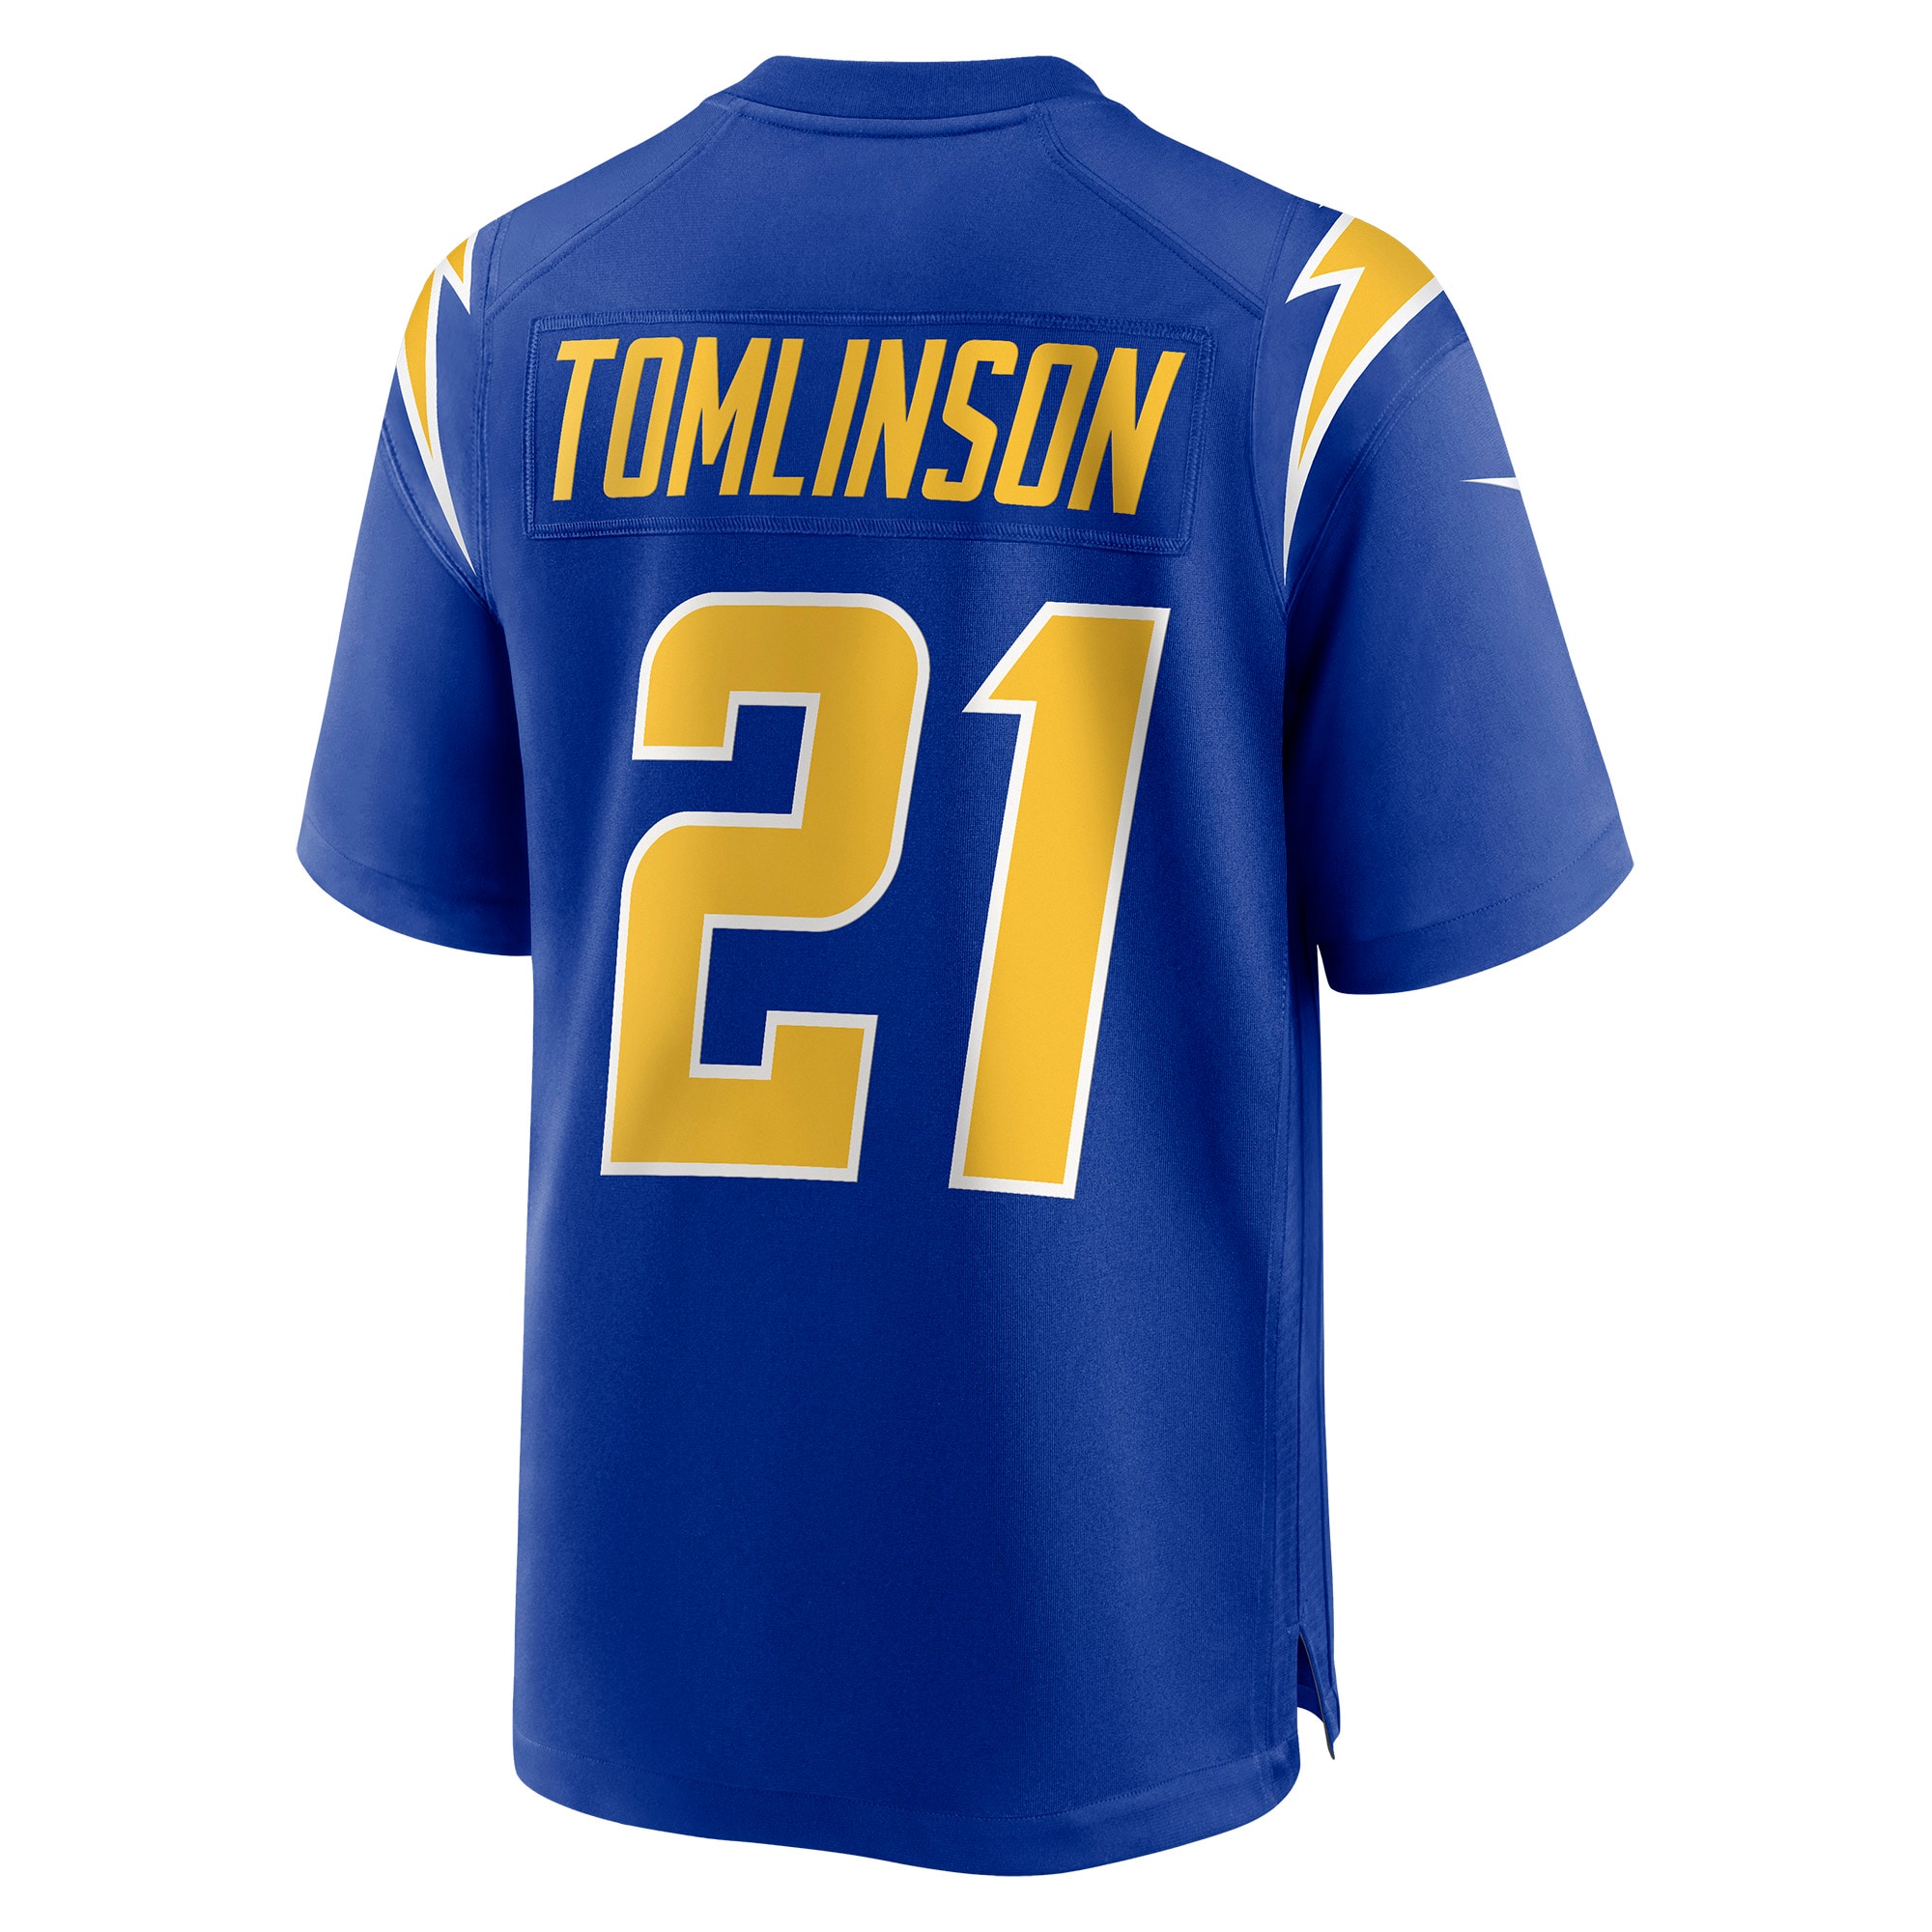 Men's Los Angeles Chargers Jerseys Royal LaDainian Tomlinson Retired Player Alternate Game Style